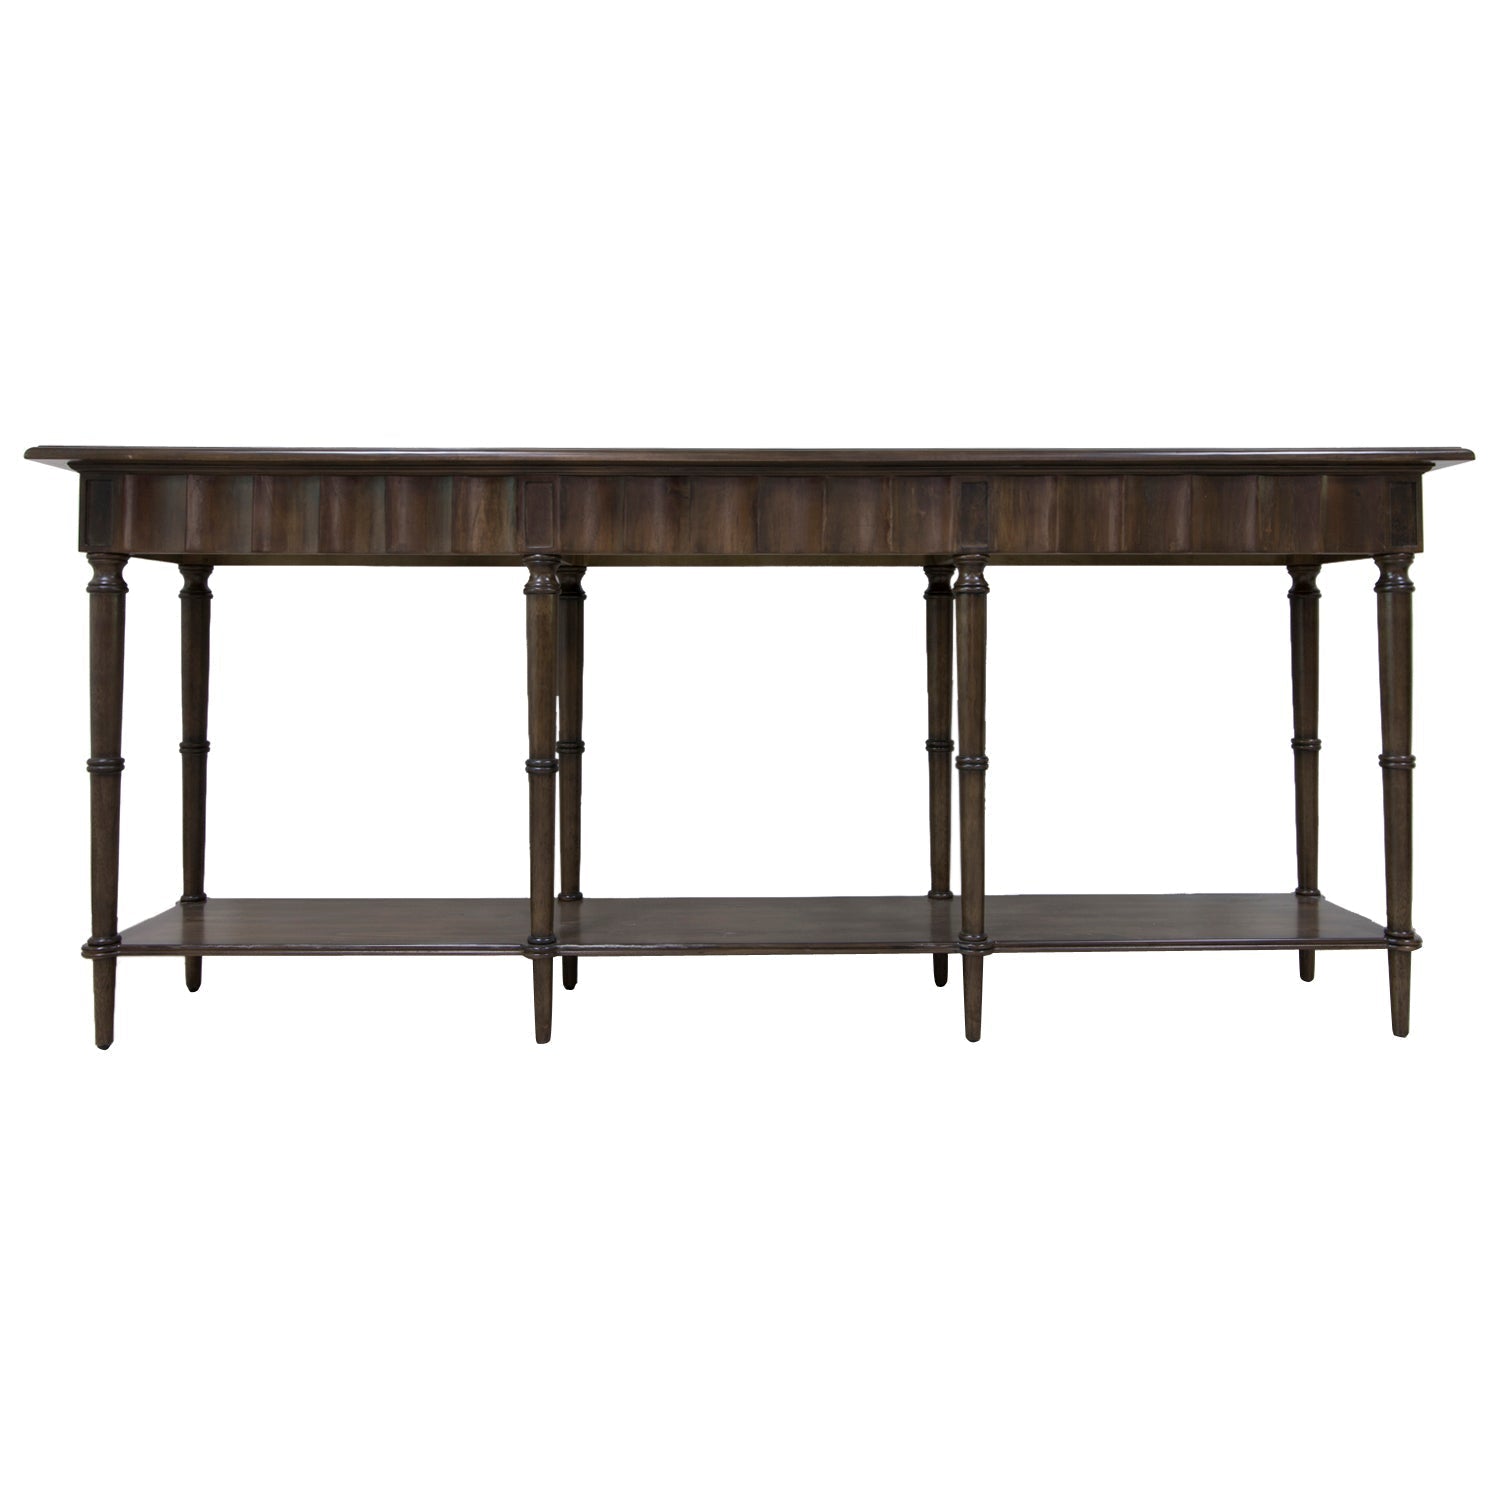 Crestview Collection Hawthorne Estate 84" x 18" x 35" 8-Leg Traditional Wood Scalloped Pine Console Table In Natural Wood Finish